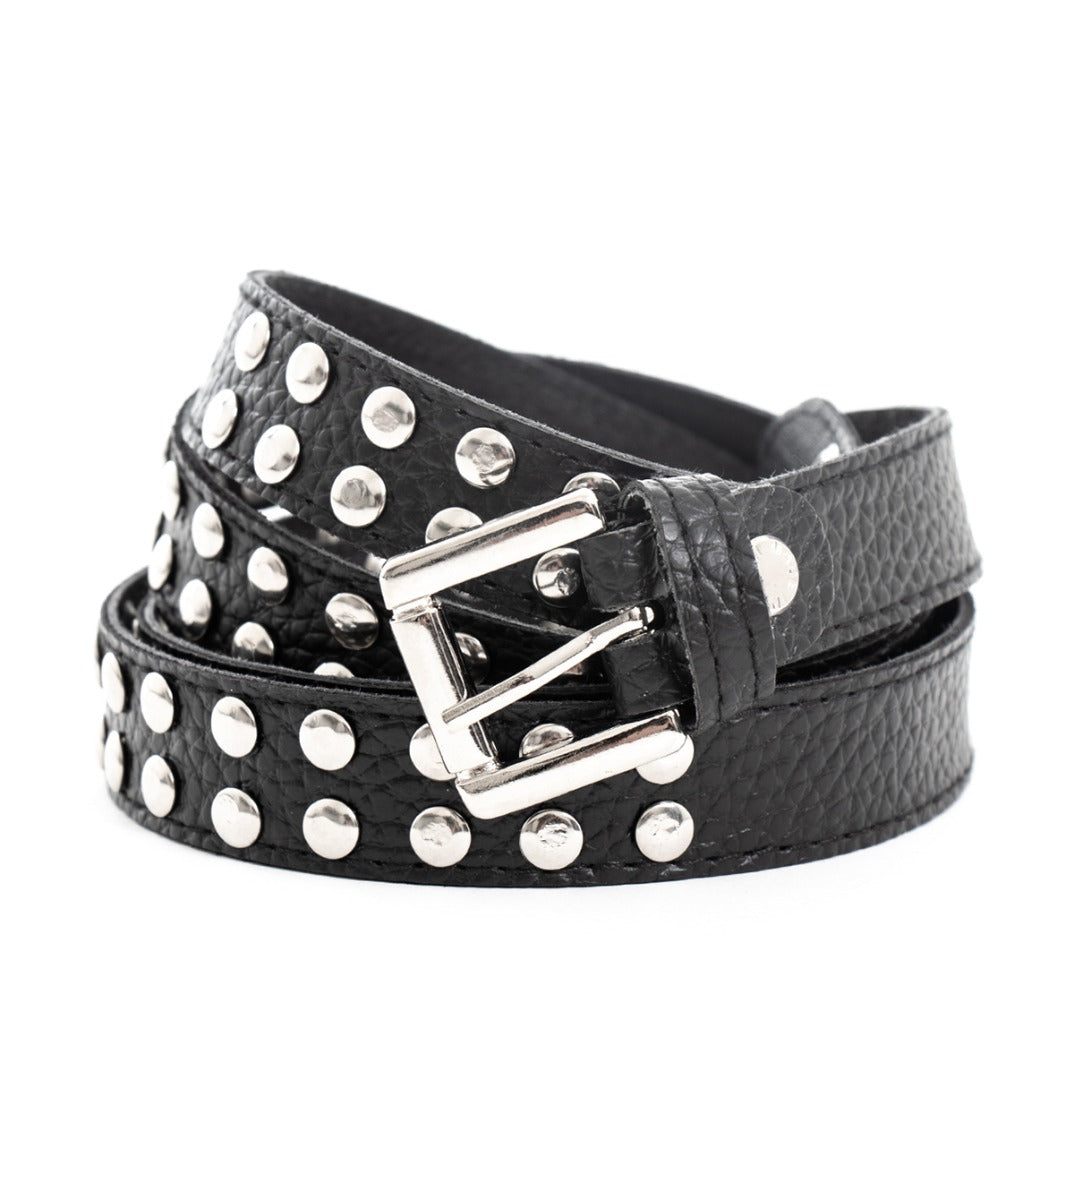 Men's Belt With Studs Adjustable Metal Buckle Belt Black Faux Leather GIOSAL-A2054A